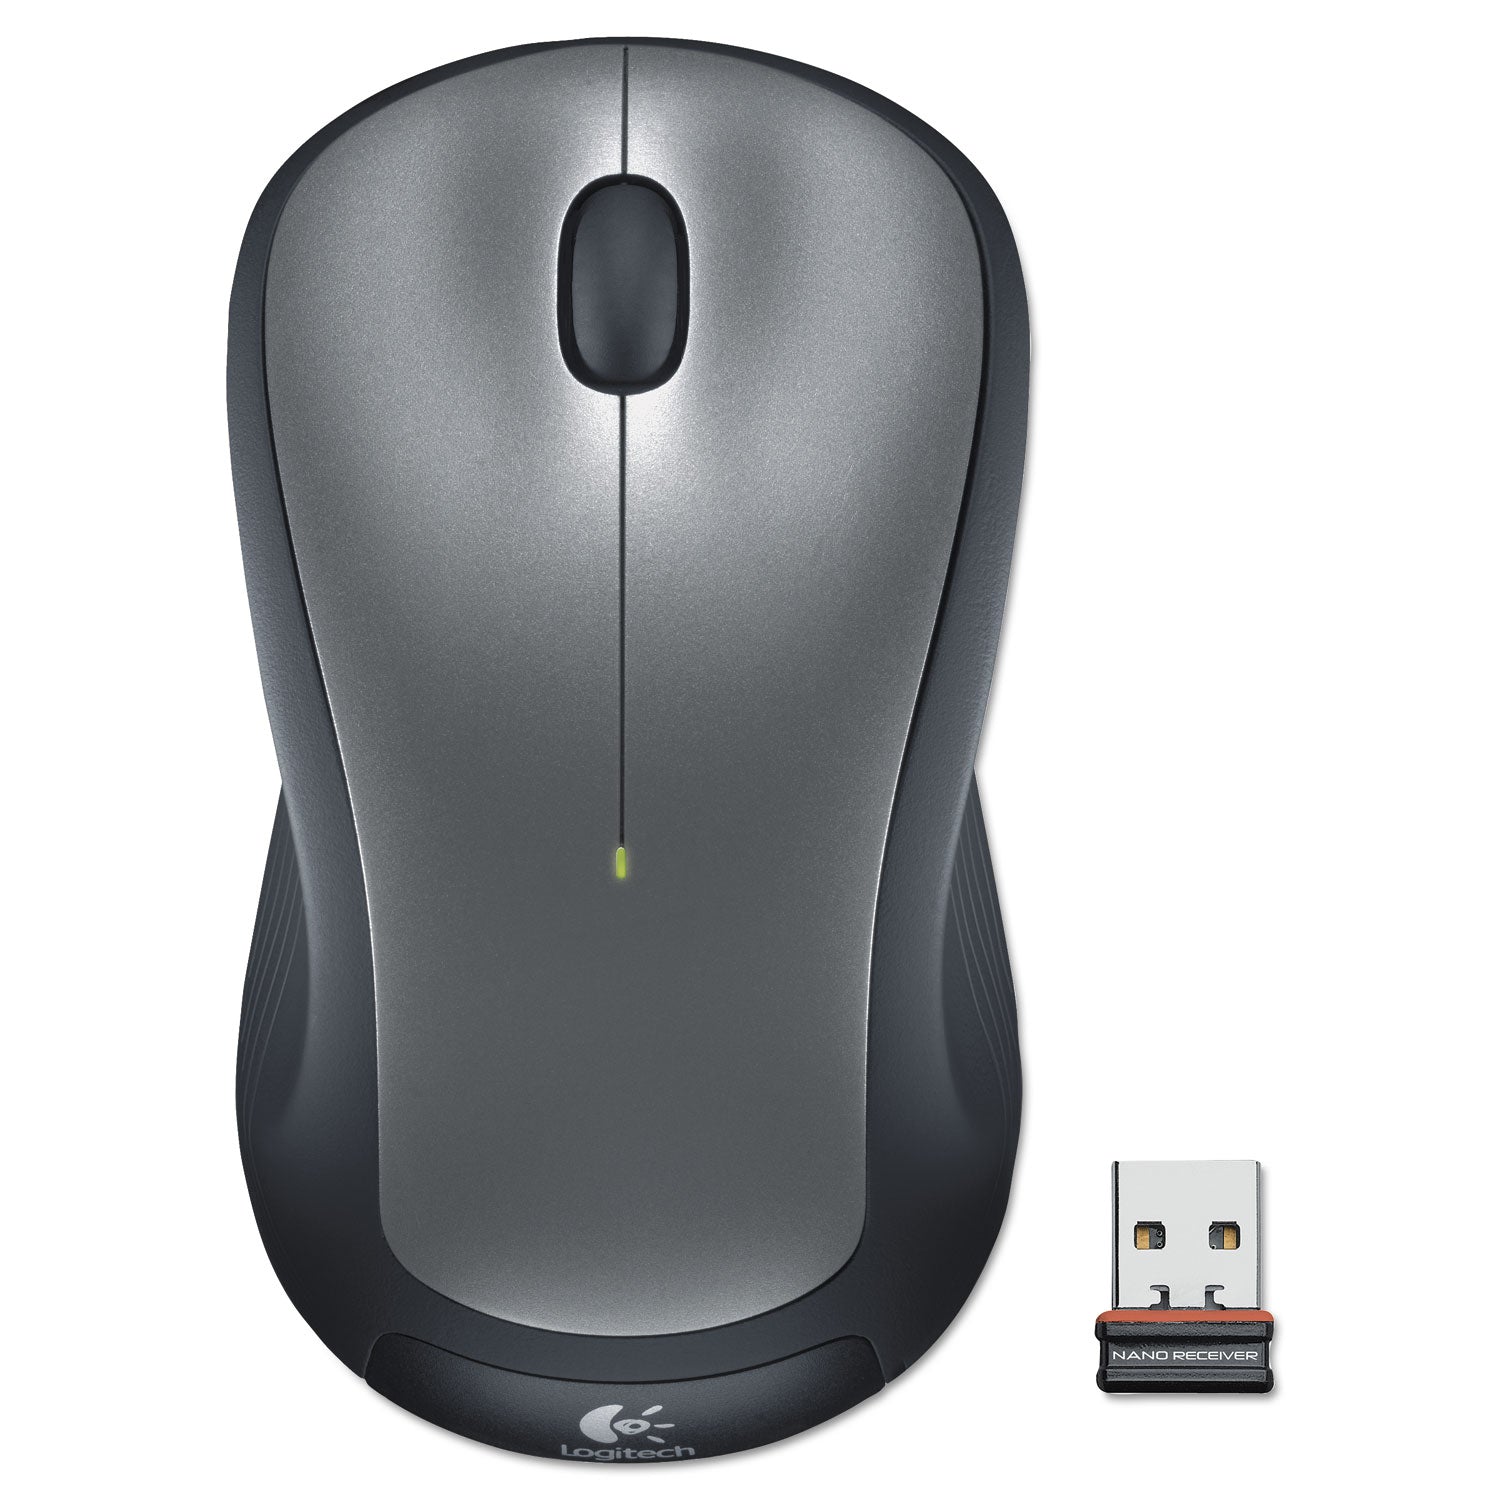 M310 Wireless Mouse, 2.4 GHz Frequency/30 ft Wireless Range, Left/Right Hand Use, Silver/Black - 